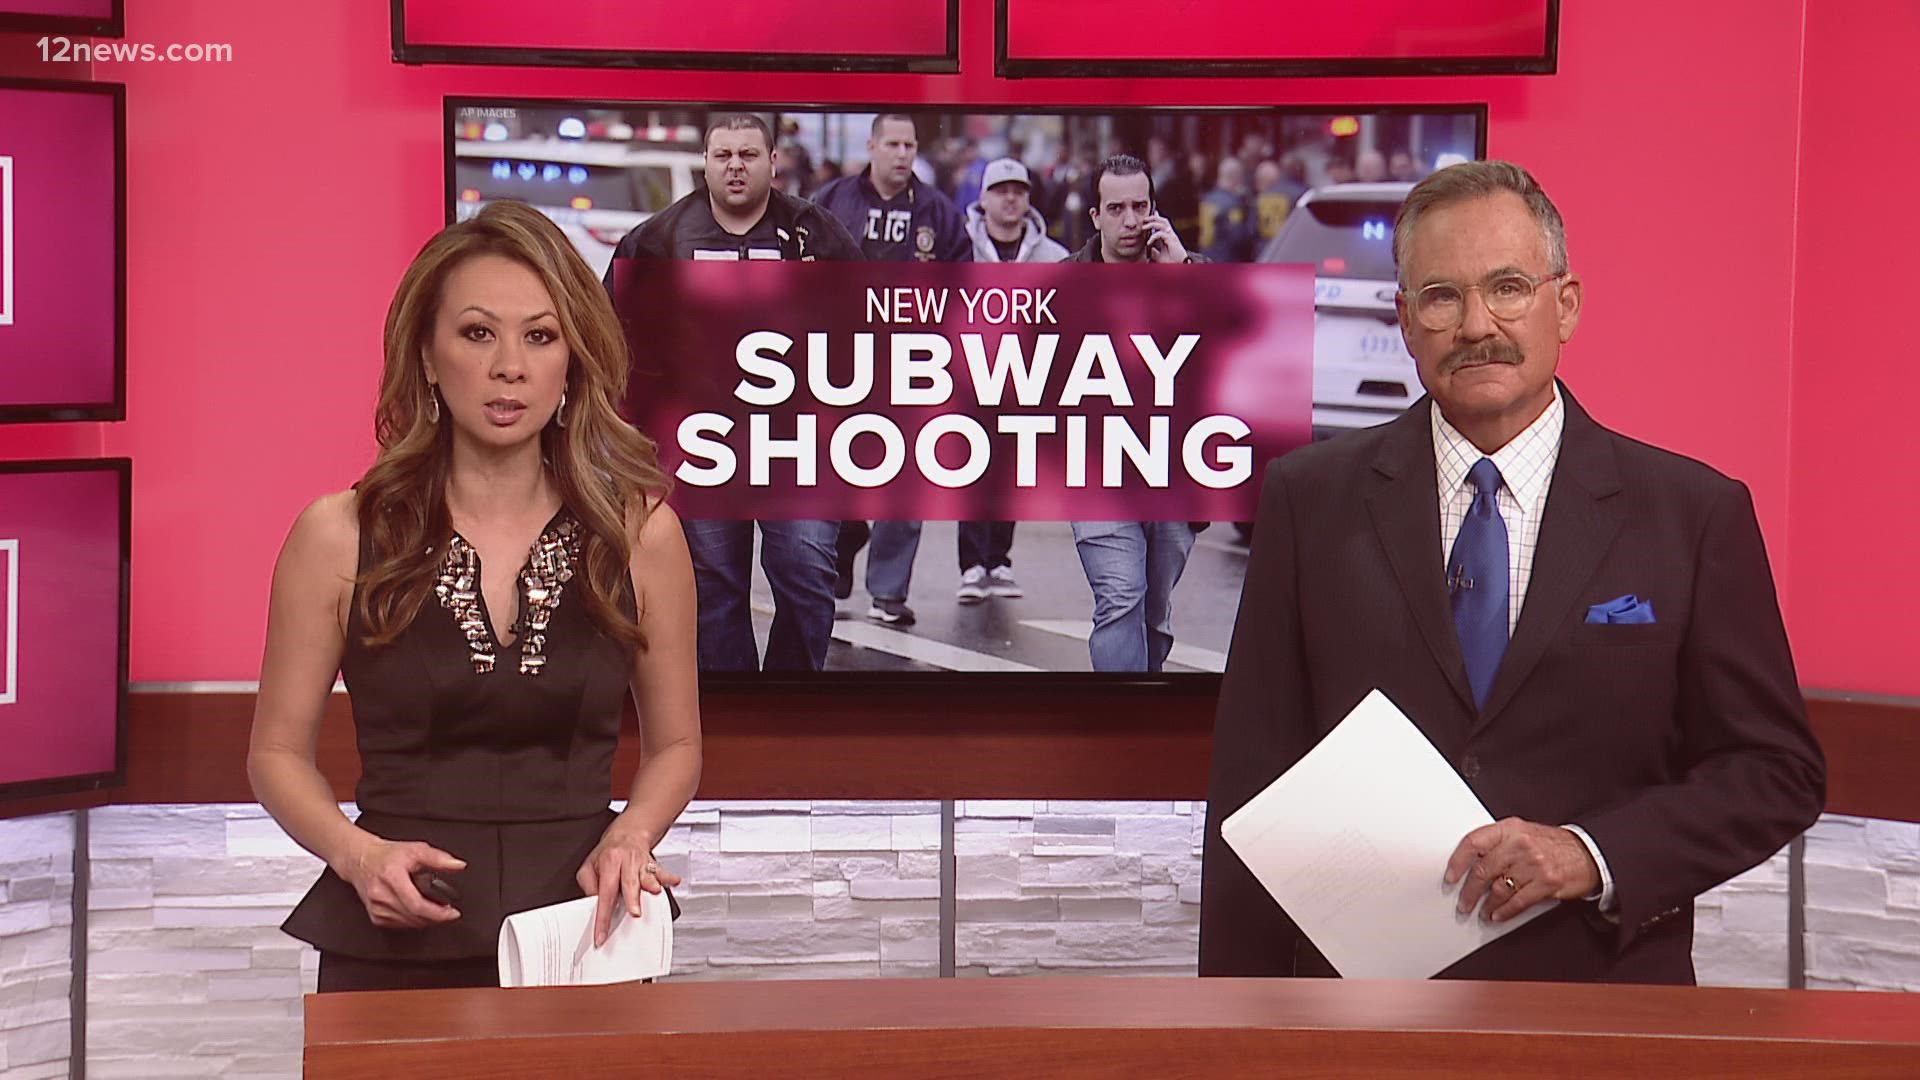 A gunman opened fire on a packed New York City subway, Arizona's windy week continues and more headlines on April 12.